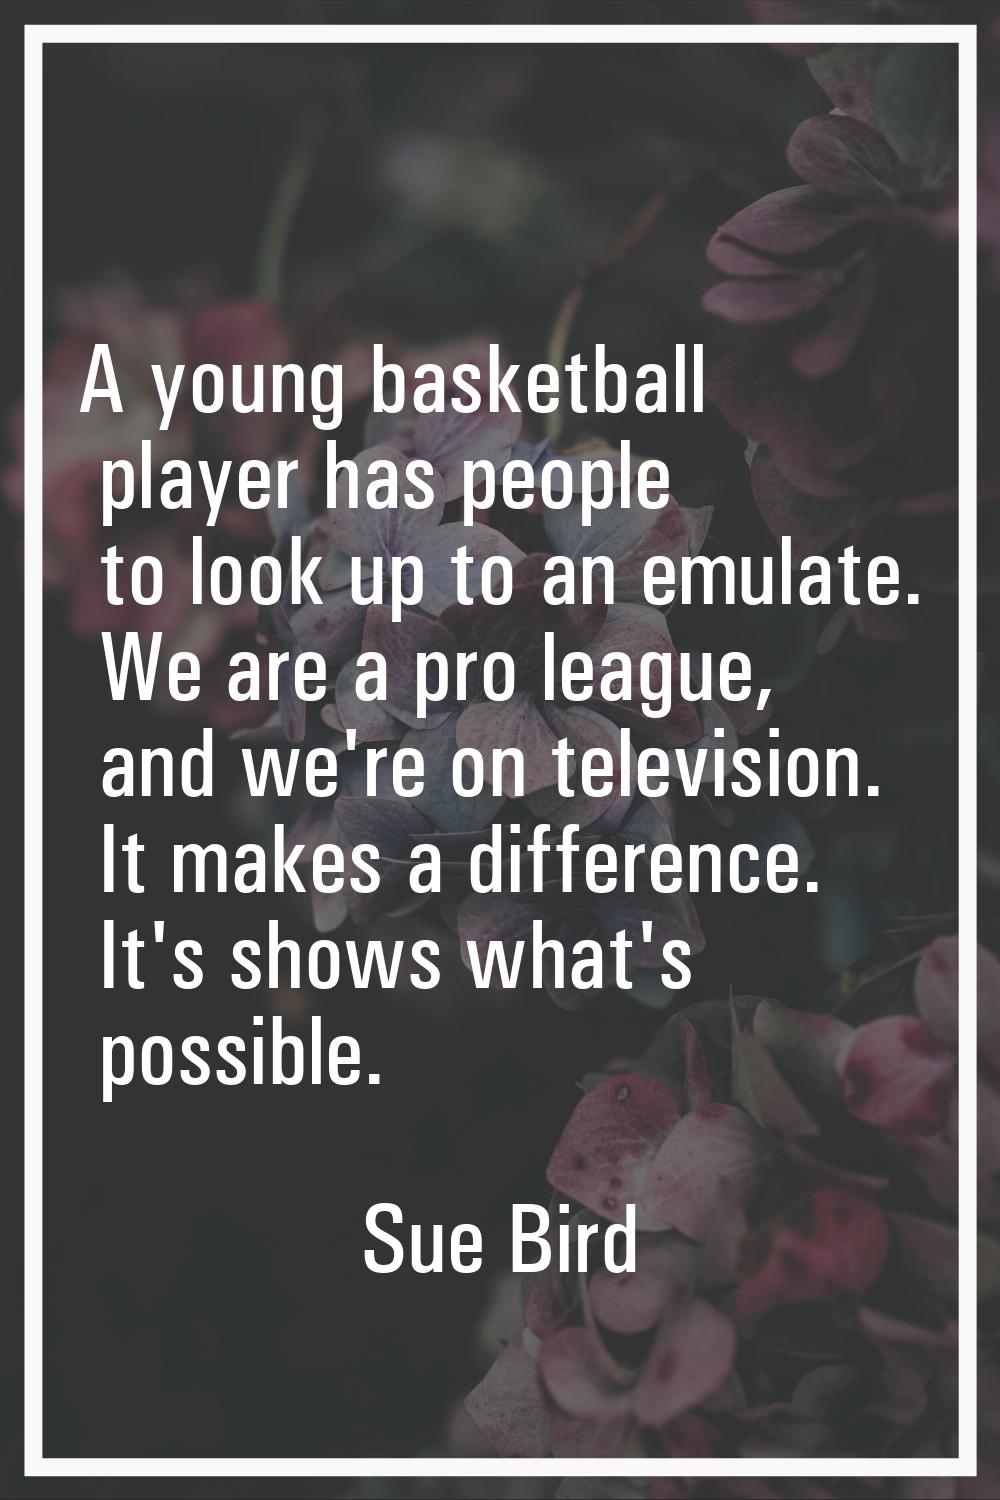 A young basketball player has people to look up to an emulate. We are a pro league, and we're on te